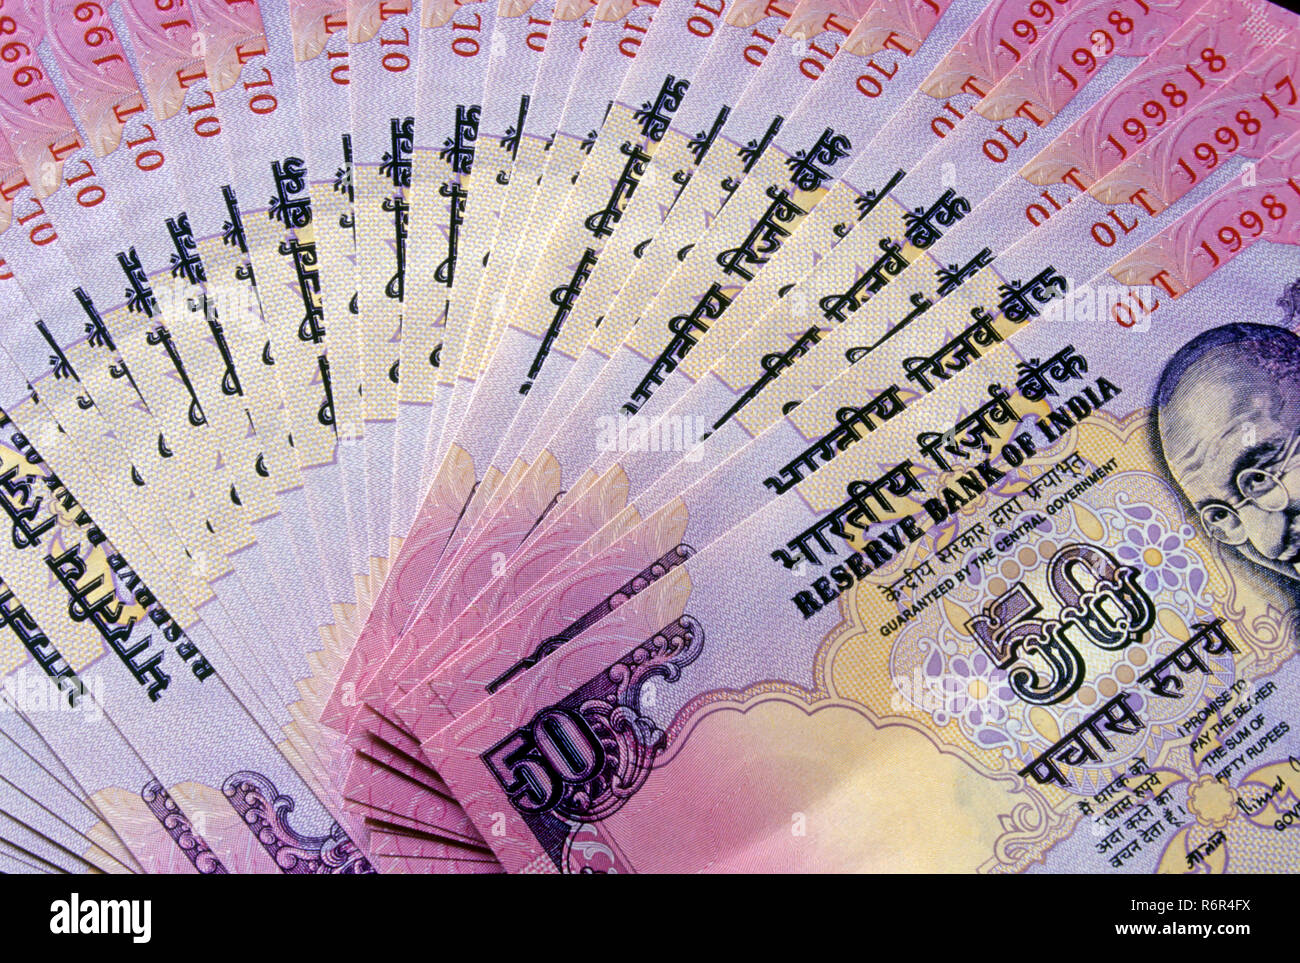 money, rupees, Indian currency Notes Stock Photo